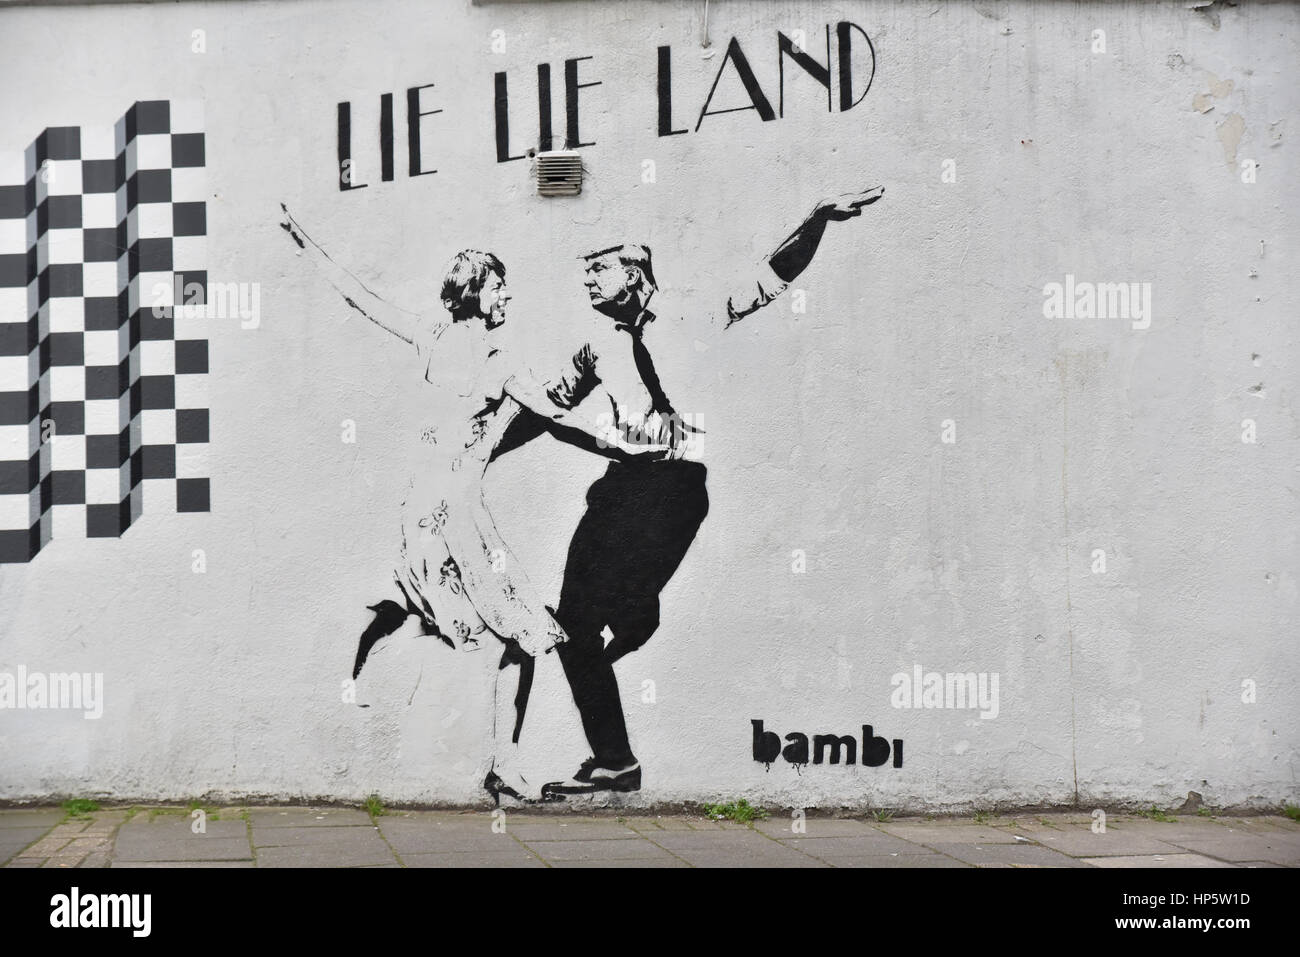 Islington, London, UK. 19th February 2017. New Graffiti by artist Bambi has appeared in Islington portraying the PM Theresa May and US President Donald Trump in a caricature of the movie as  'Lie Lie Land'. Credit: Matthew Chattle/Alamy Live News Stock Photo